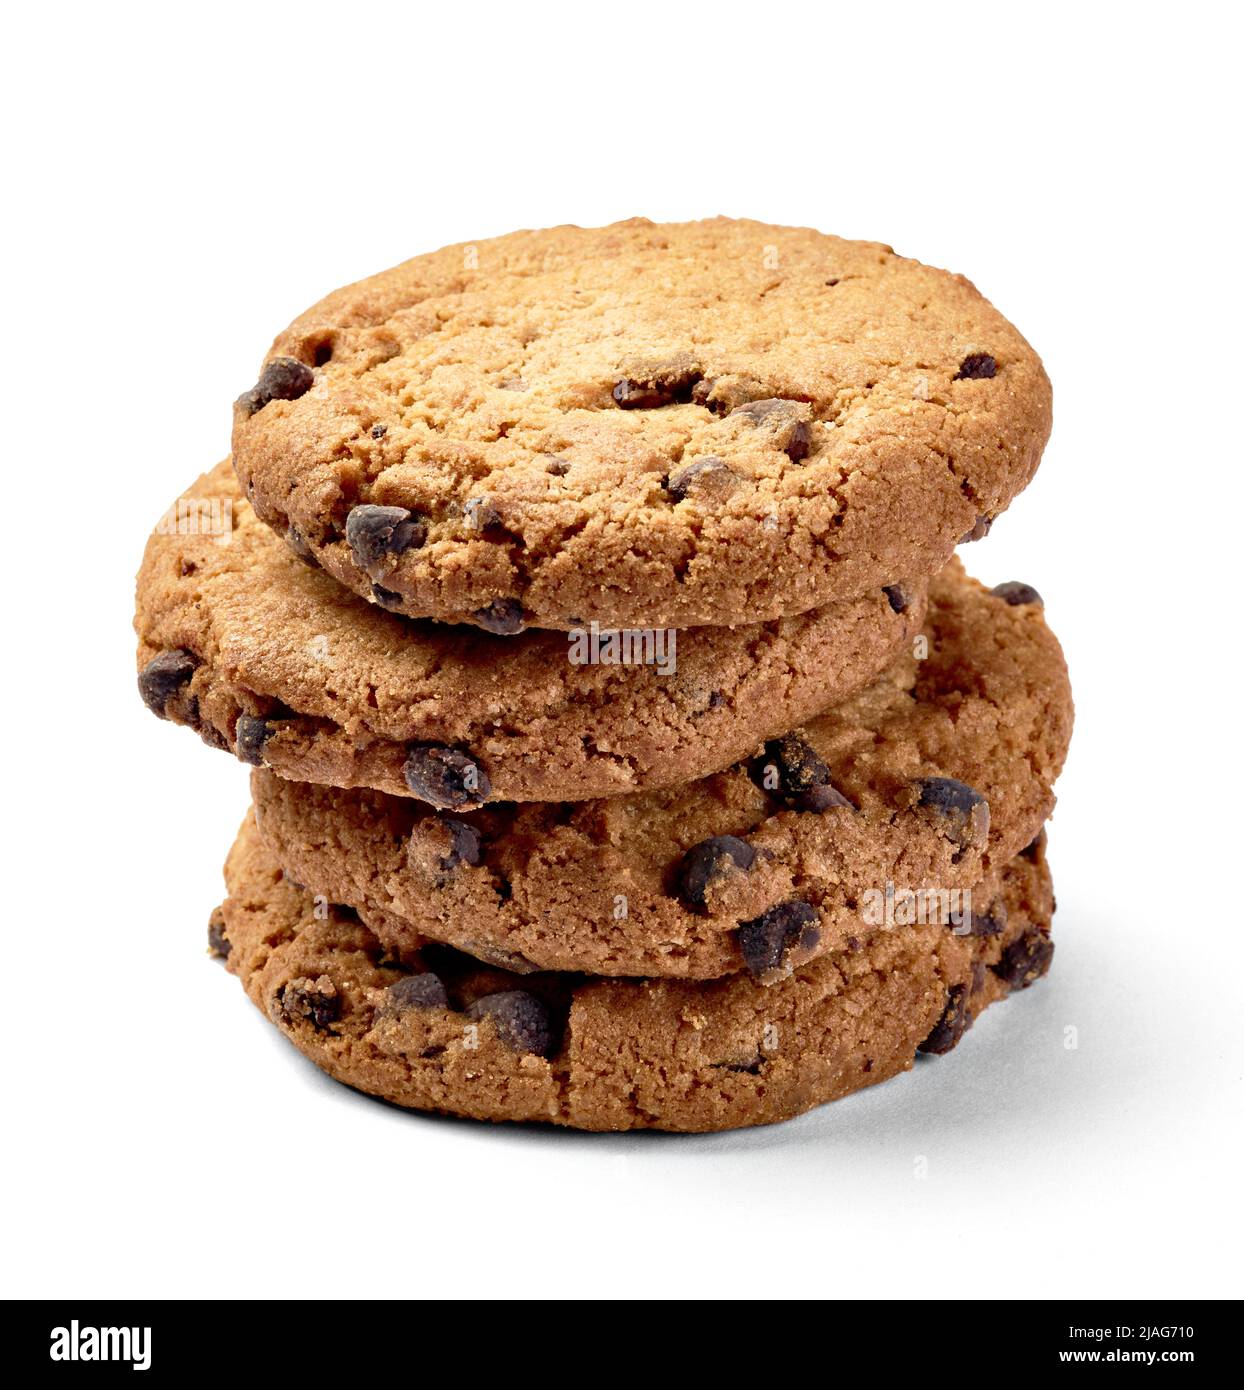 cookie chocolate sweet snack food biscuit Stock Photo